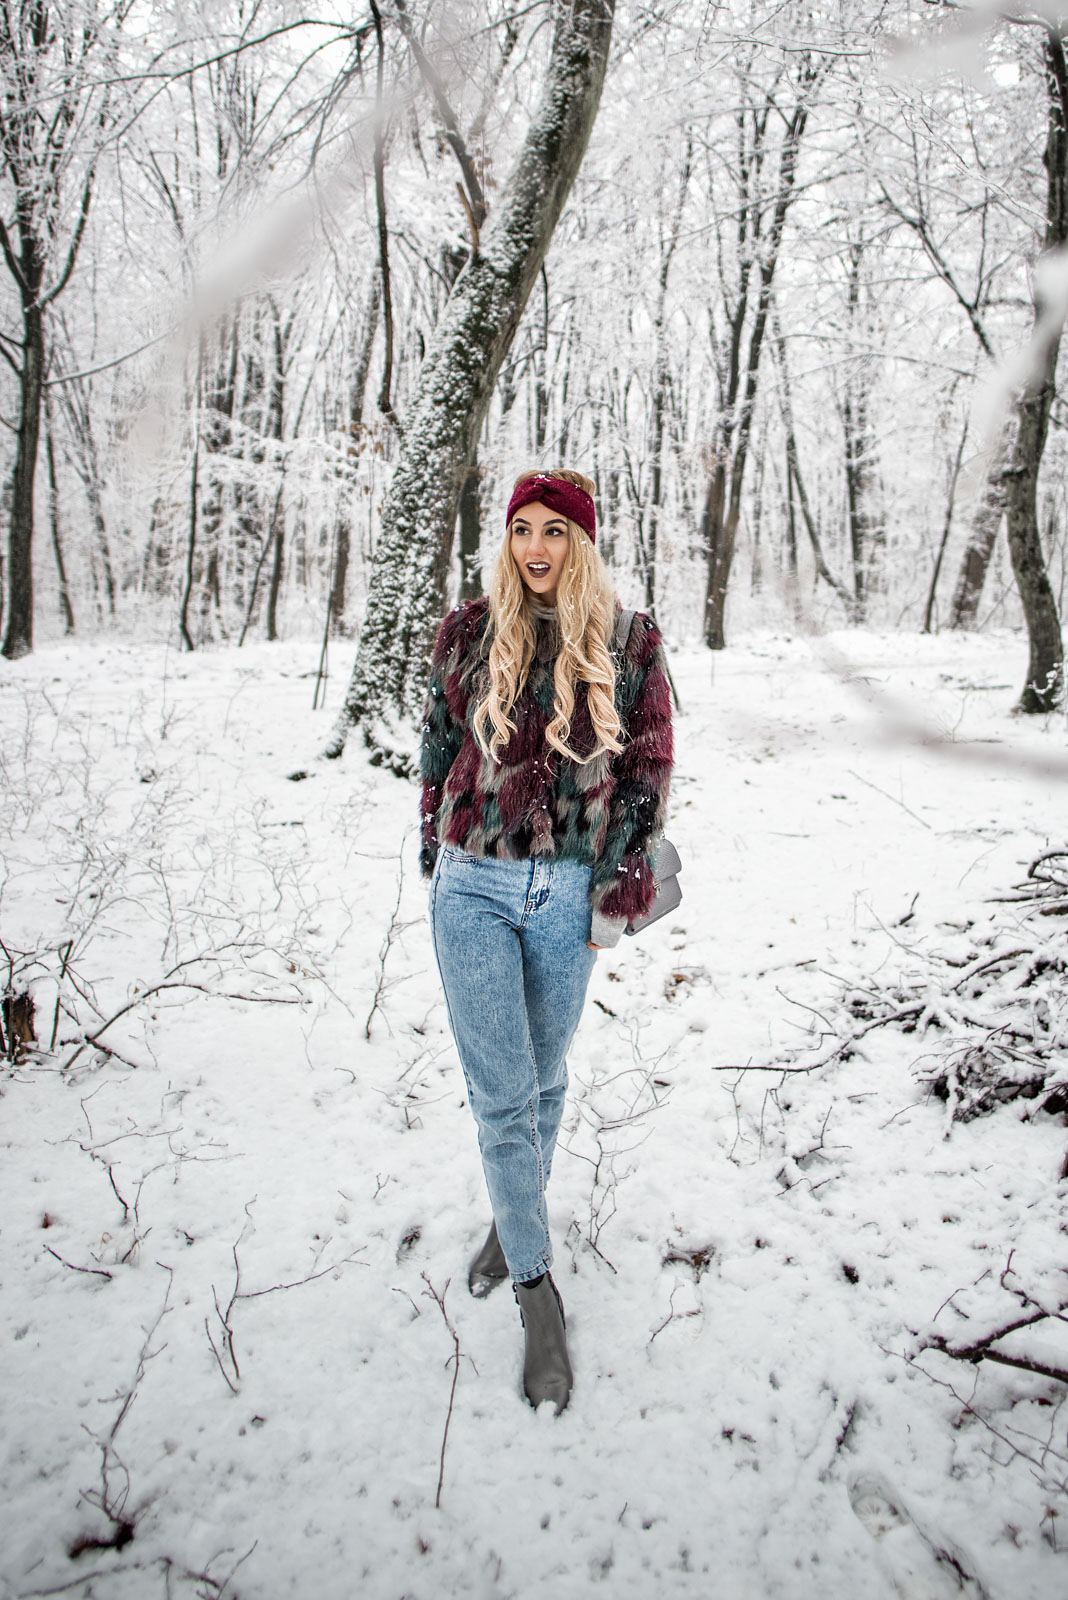 Chic and Warm in the Snow